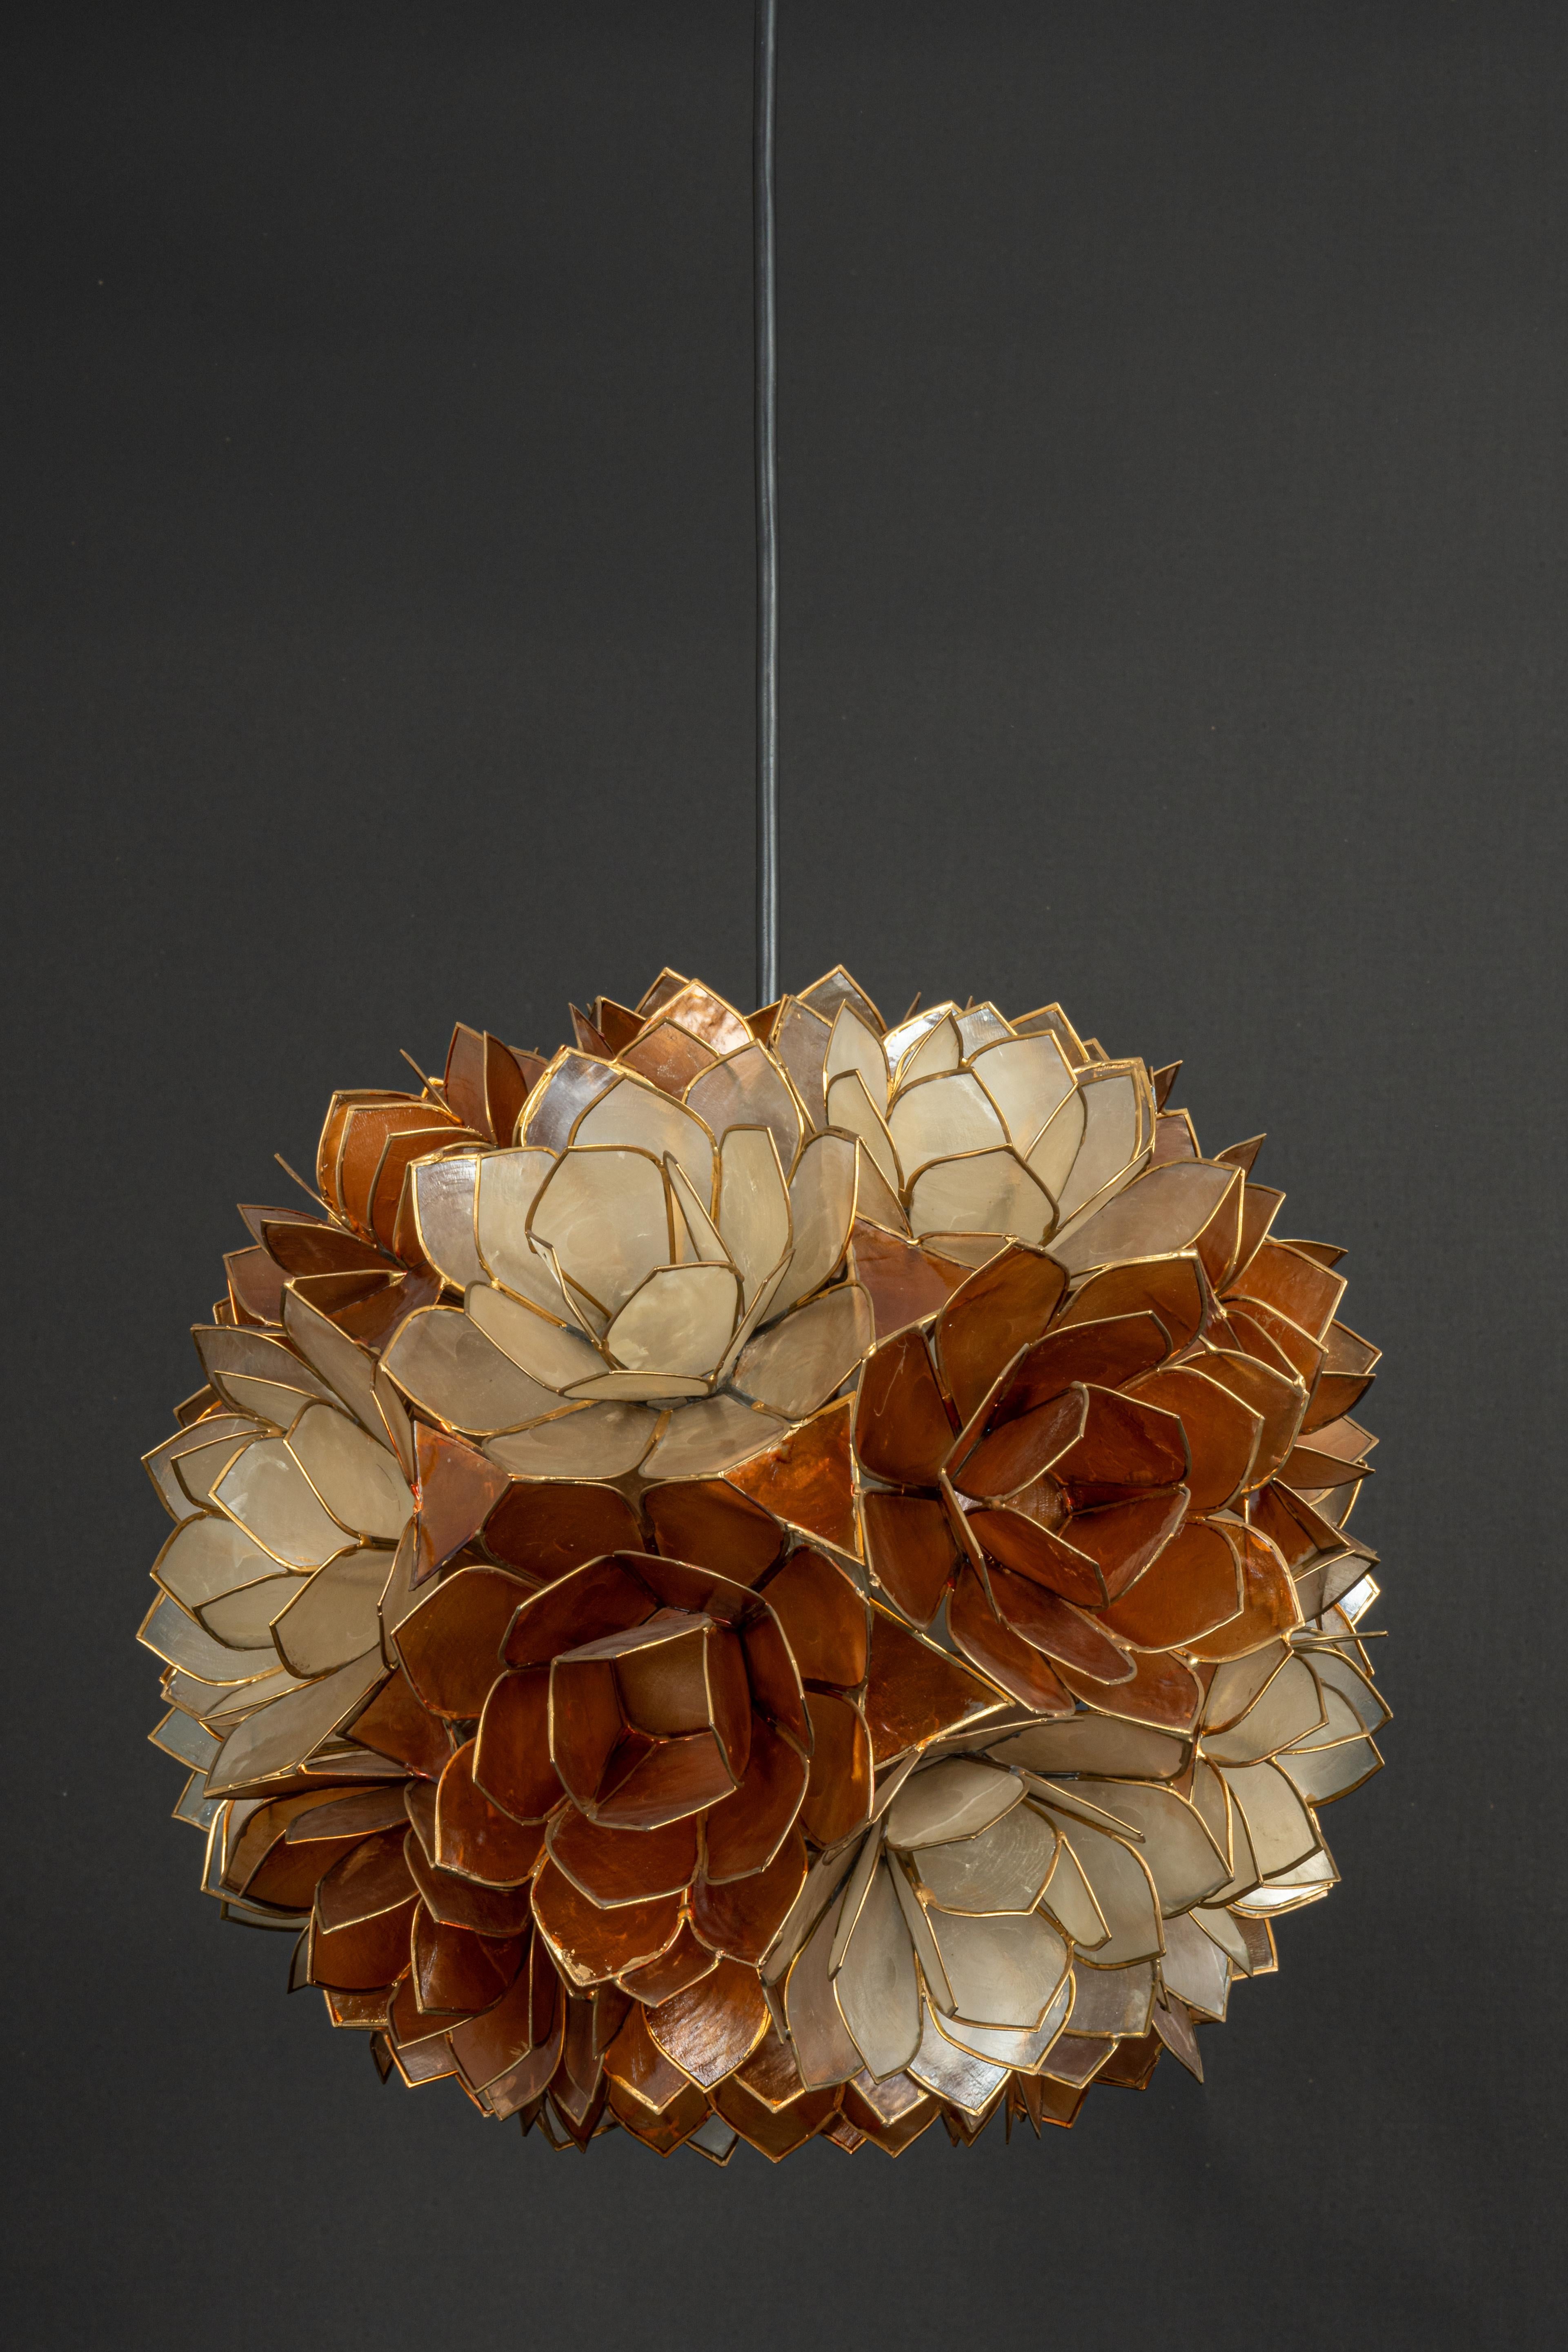 Stunning Capiz shell lotus ball chandelier pendant light Germany, 1960s

It requires 1 x E27 standard bulbs with 100W max each.
A light bulb is not included. It is possible to install this fixture in all countries (US, UK, Europe, Asia,